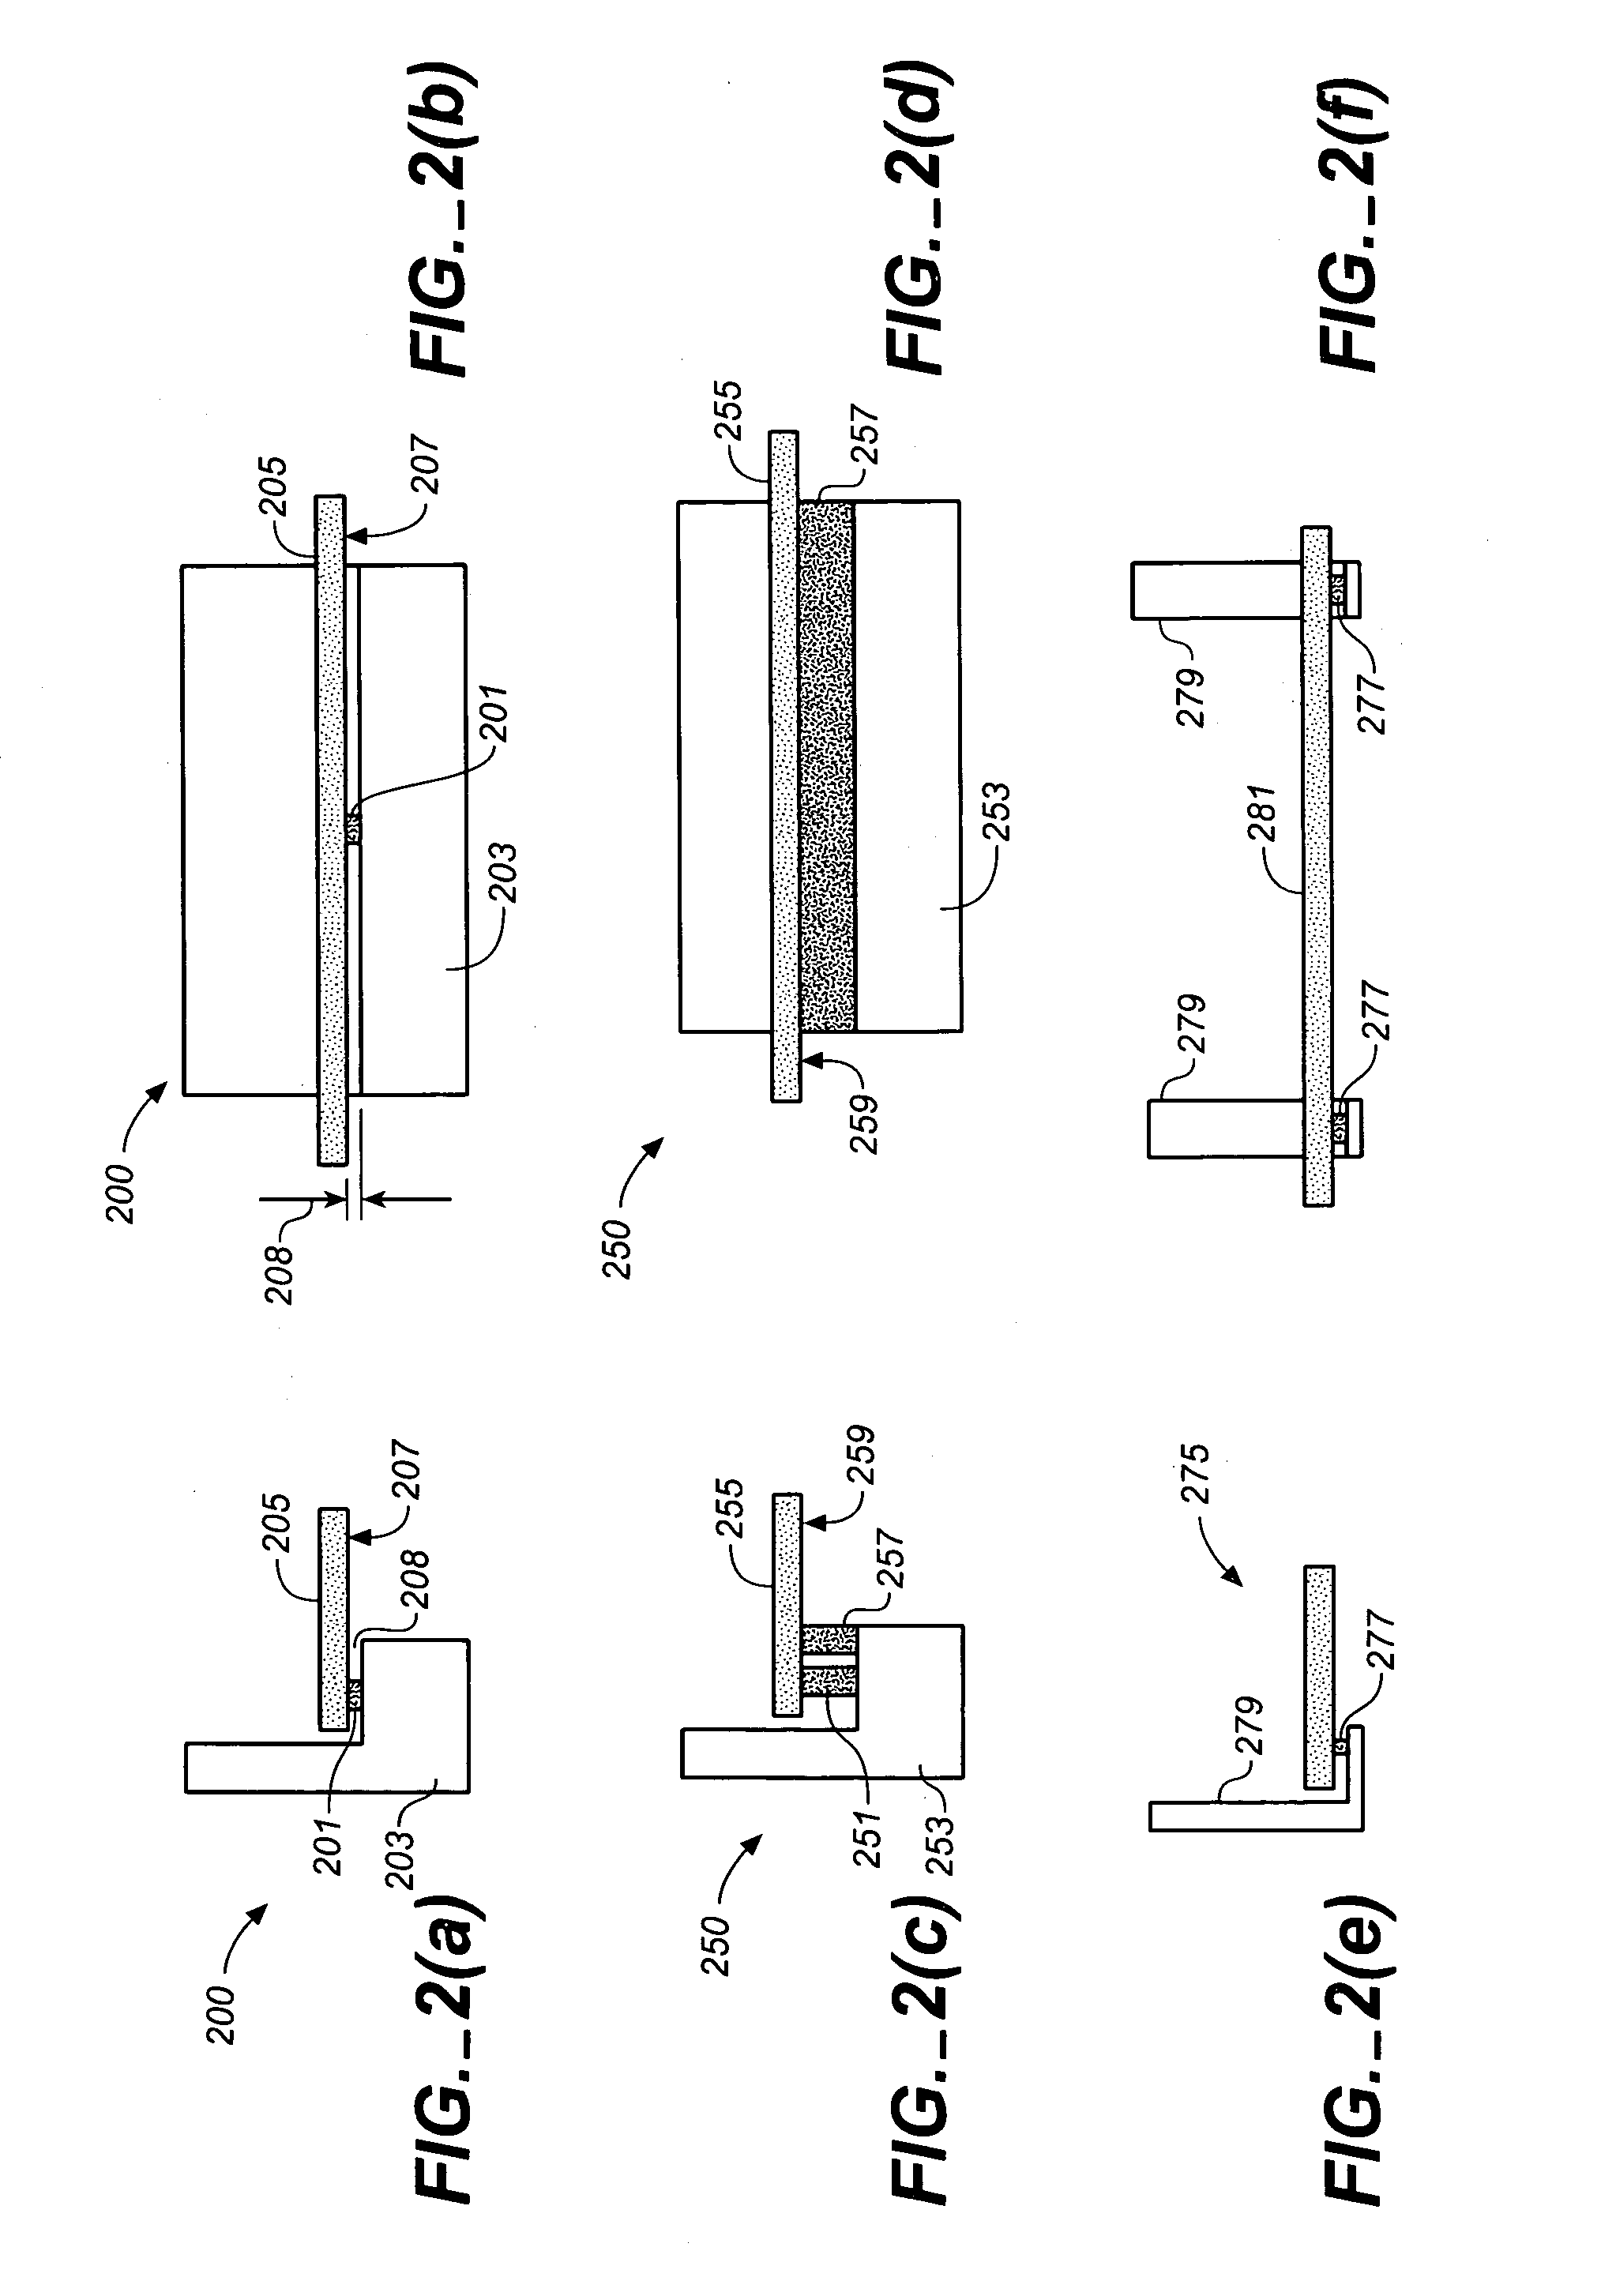 Contact ring design for reducing bubble and electrolyte effects during electrochemical plating in manufacturing